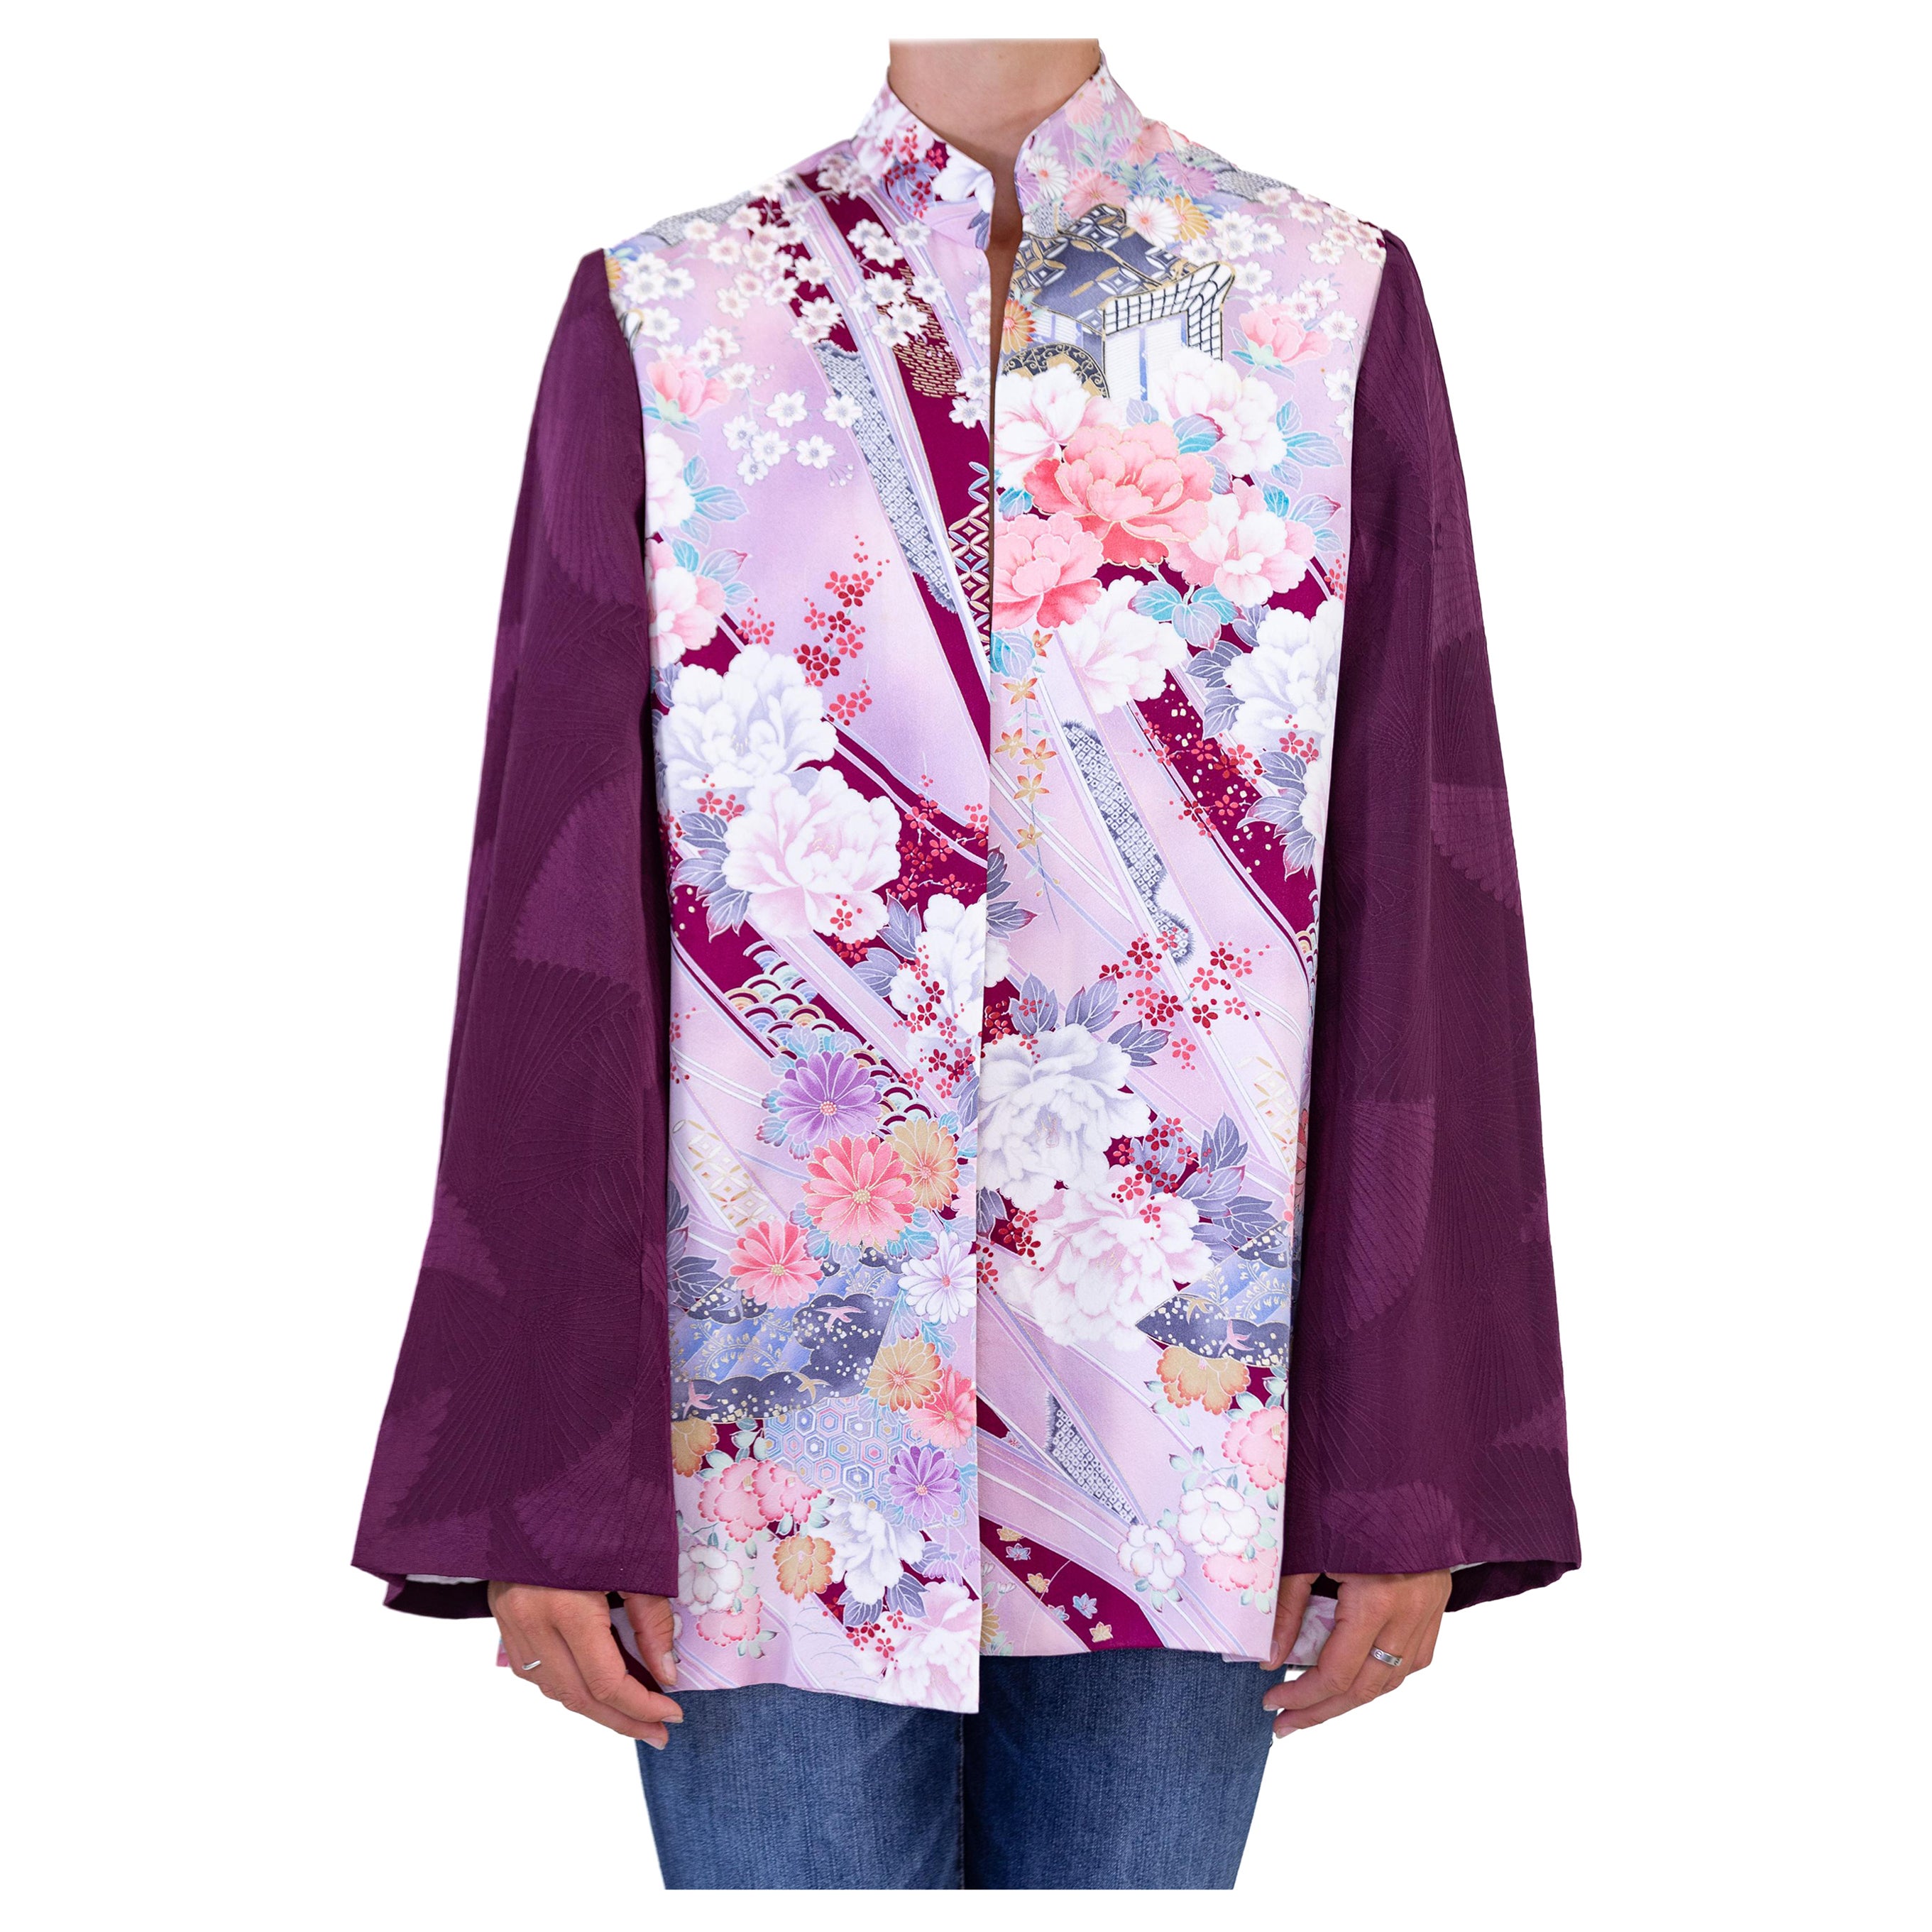 Morphew Collection Purple Floral Japanese Kimono Silk Jacket With Solid Sleeves